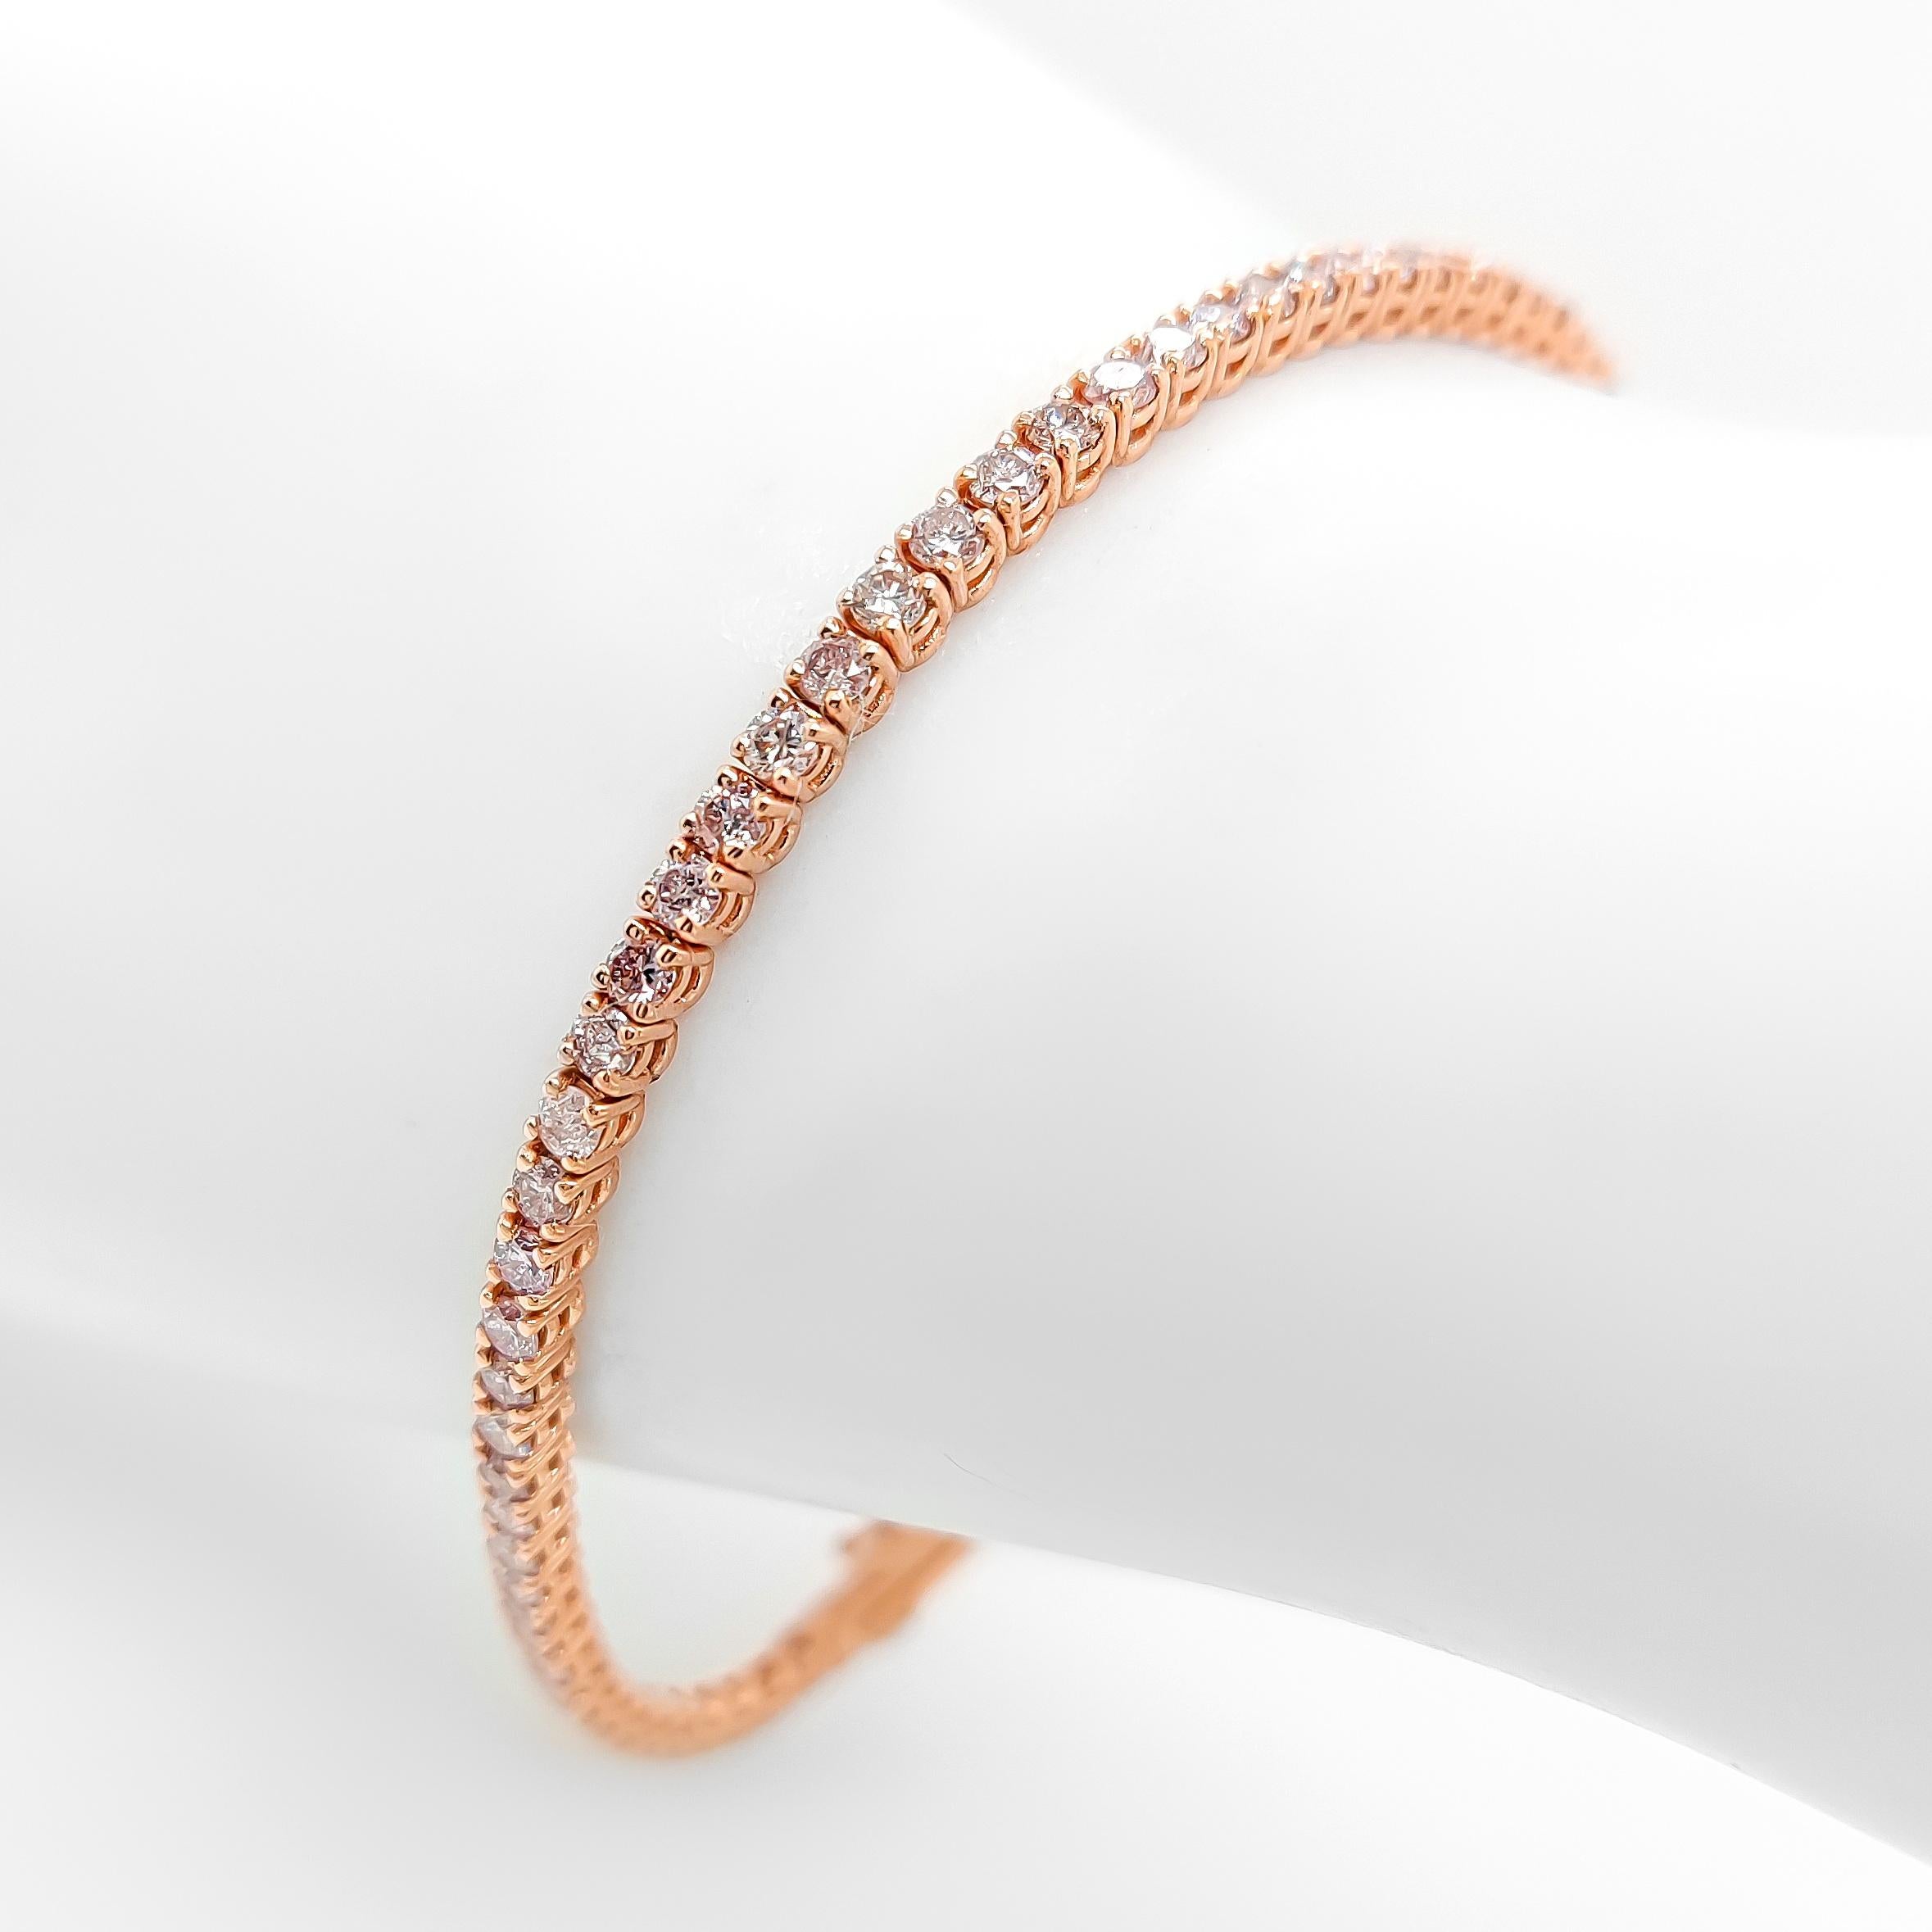  NO RESERVE - IGI 3.45 Carat Natural Round Fancy Pink Diamonds 14K Gold Bracelet In New Condition For Sale In Ramat Gan, IL